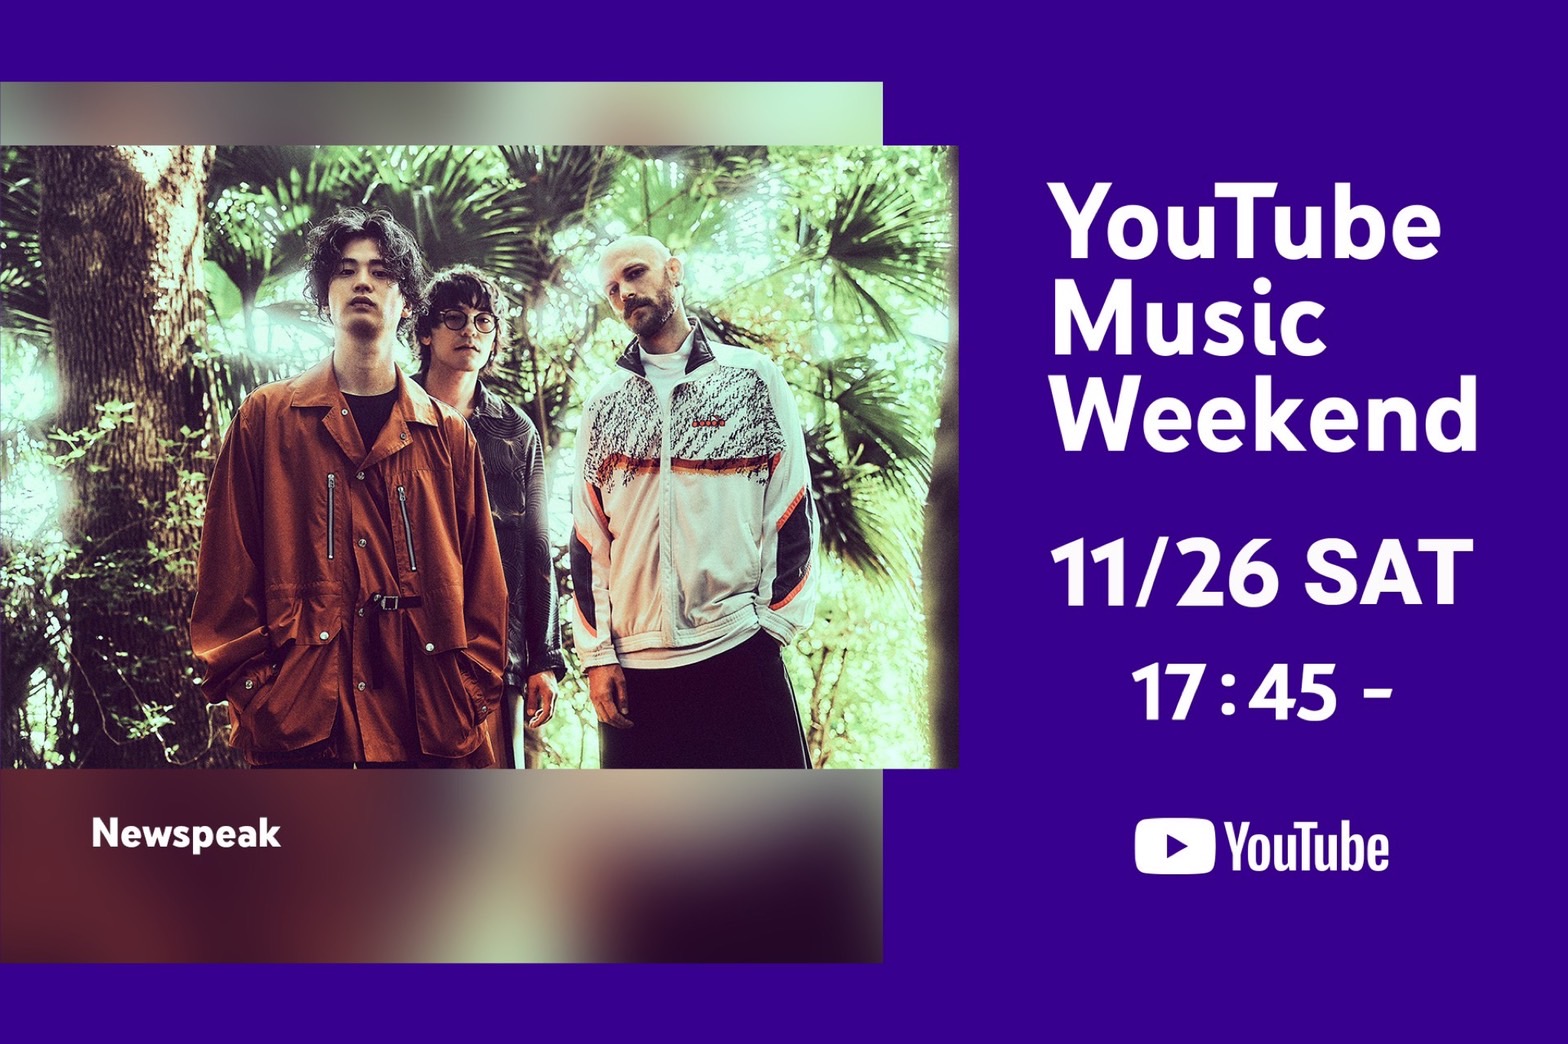 YouTube Music Weekend Vol.6 参加決定！